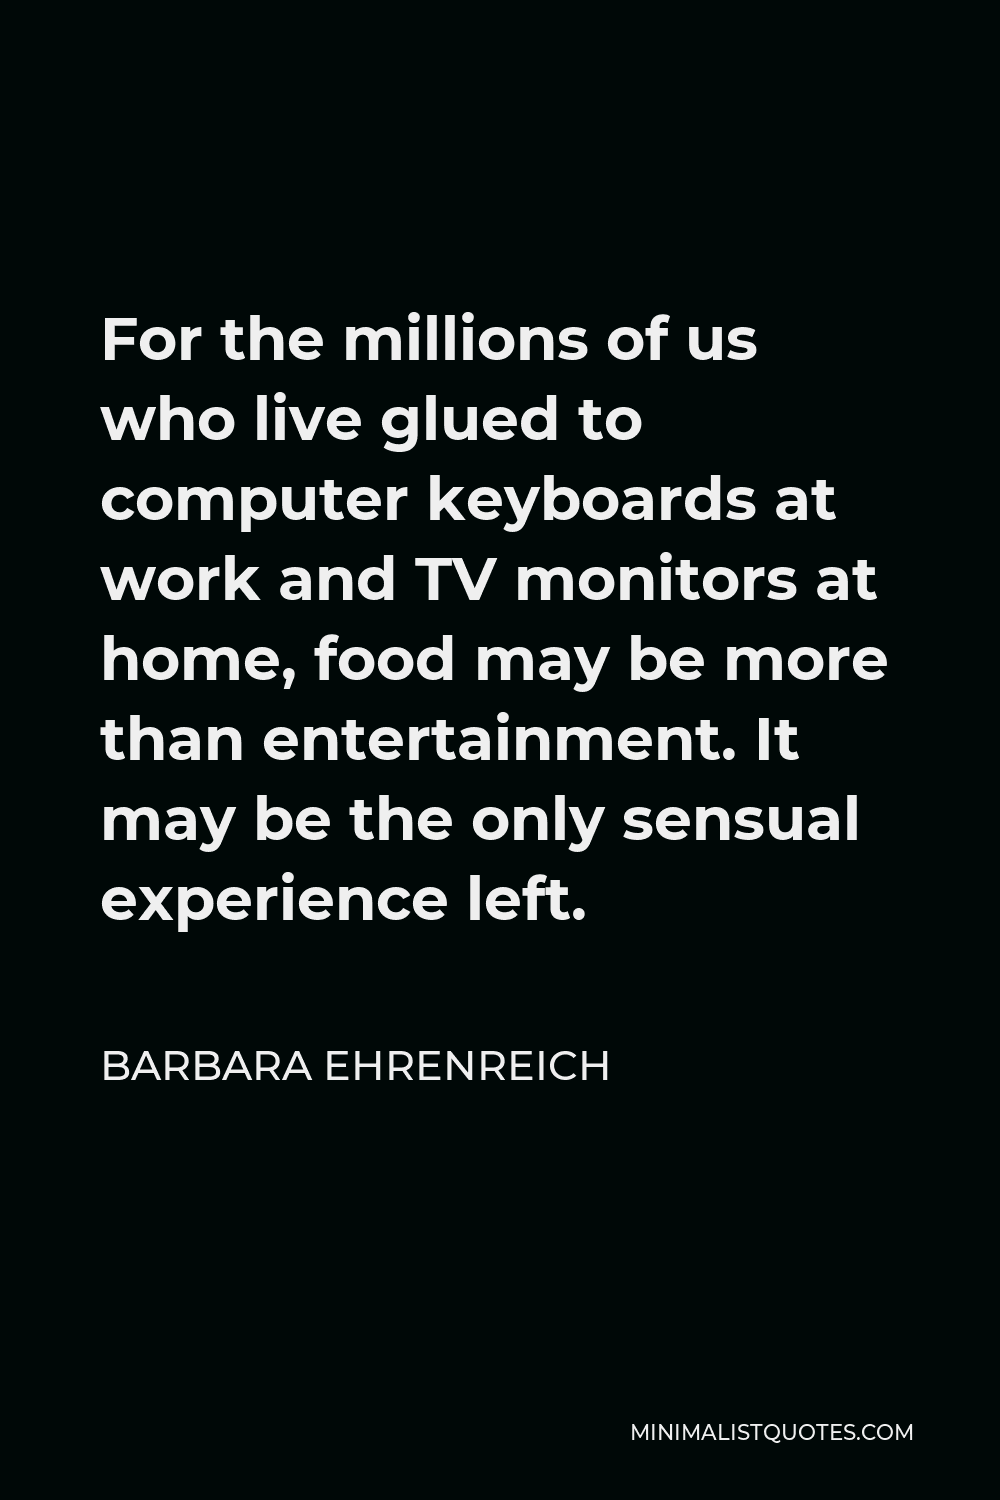 Barbara Ehrenreich Quote - For the millions of us who live glued to computer keyboards at work and TV monitors at home, food may be more than entertainment. It may be the only sensual experience left.